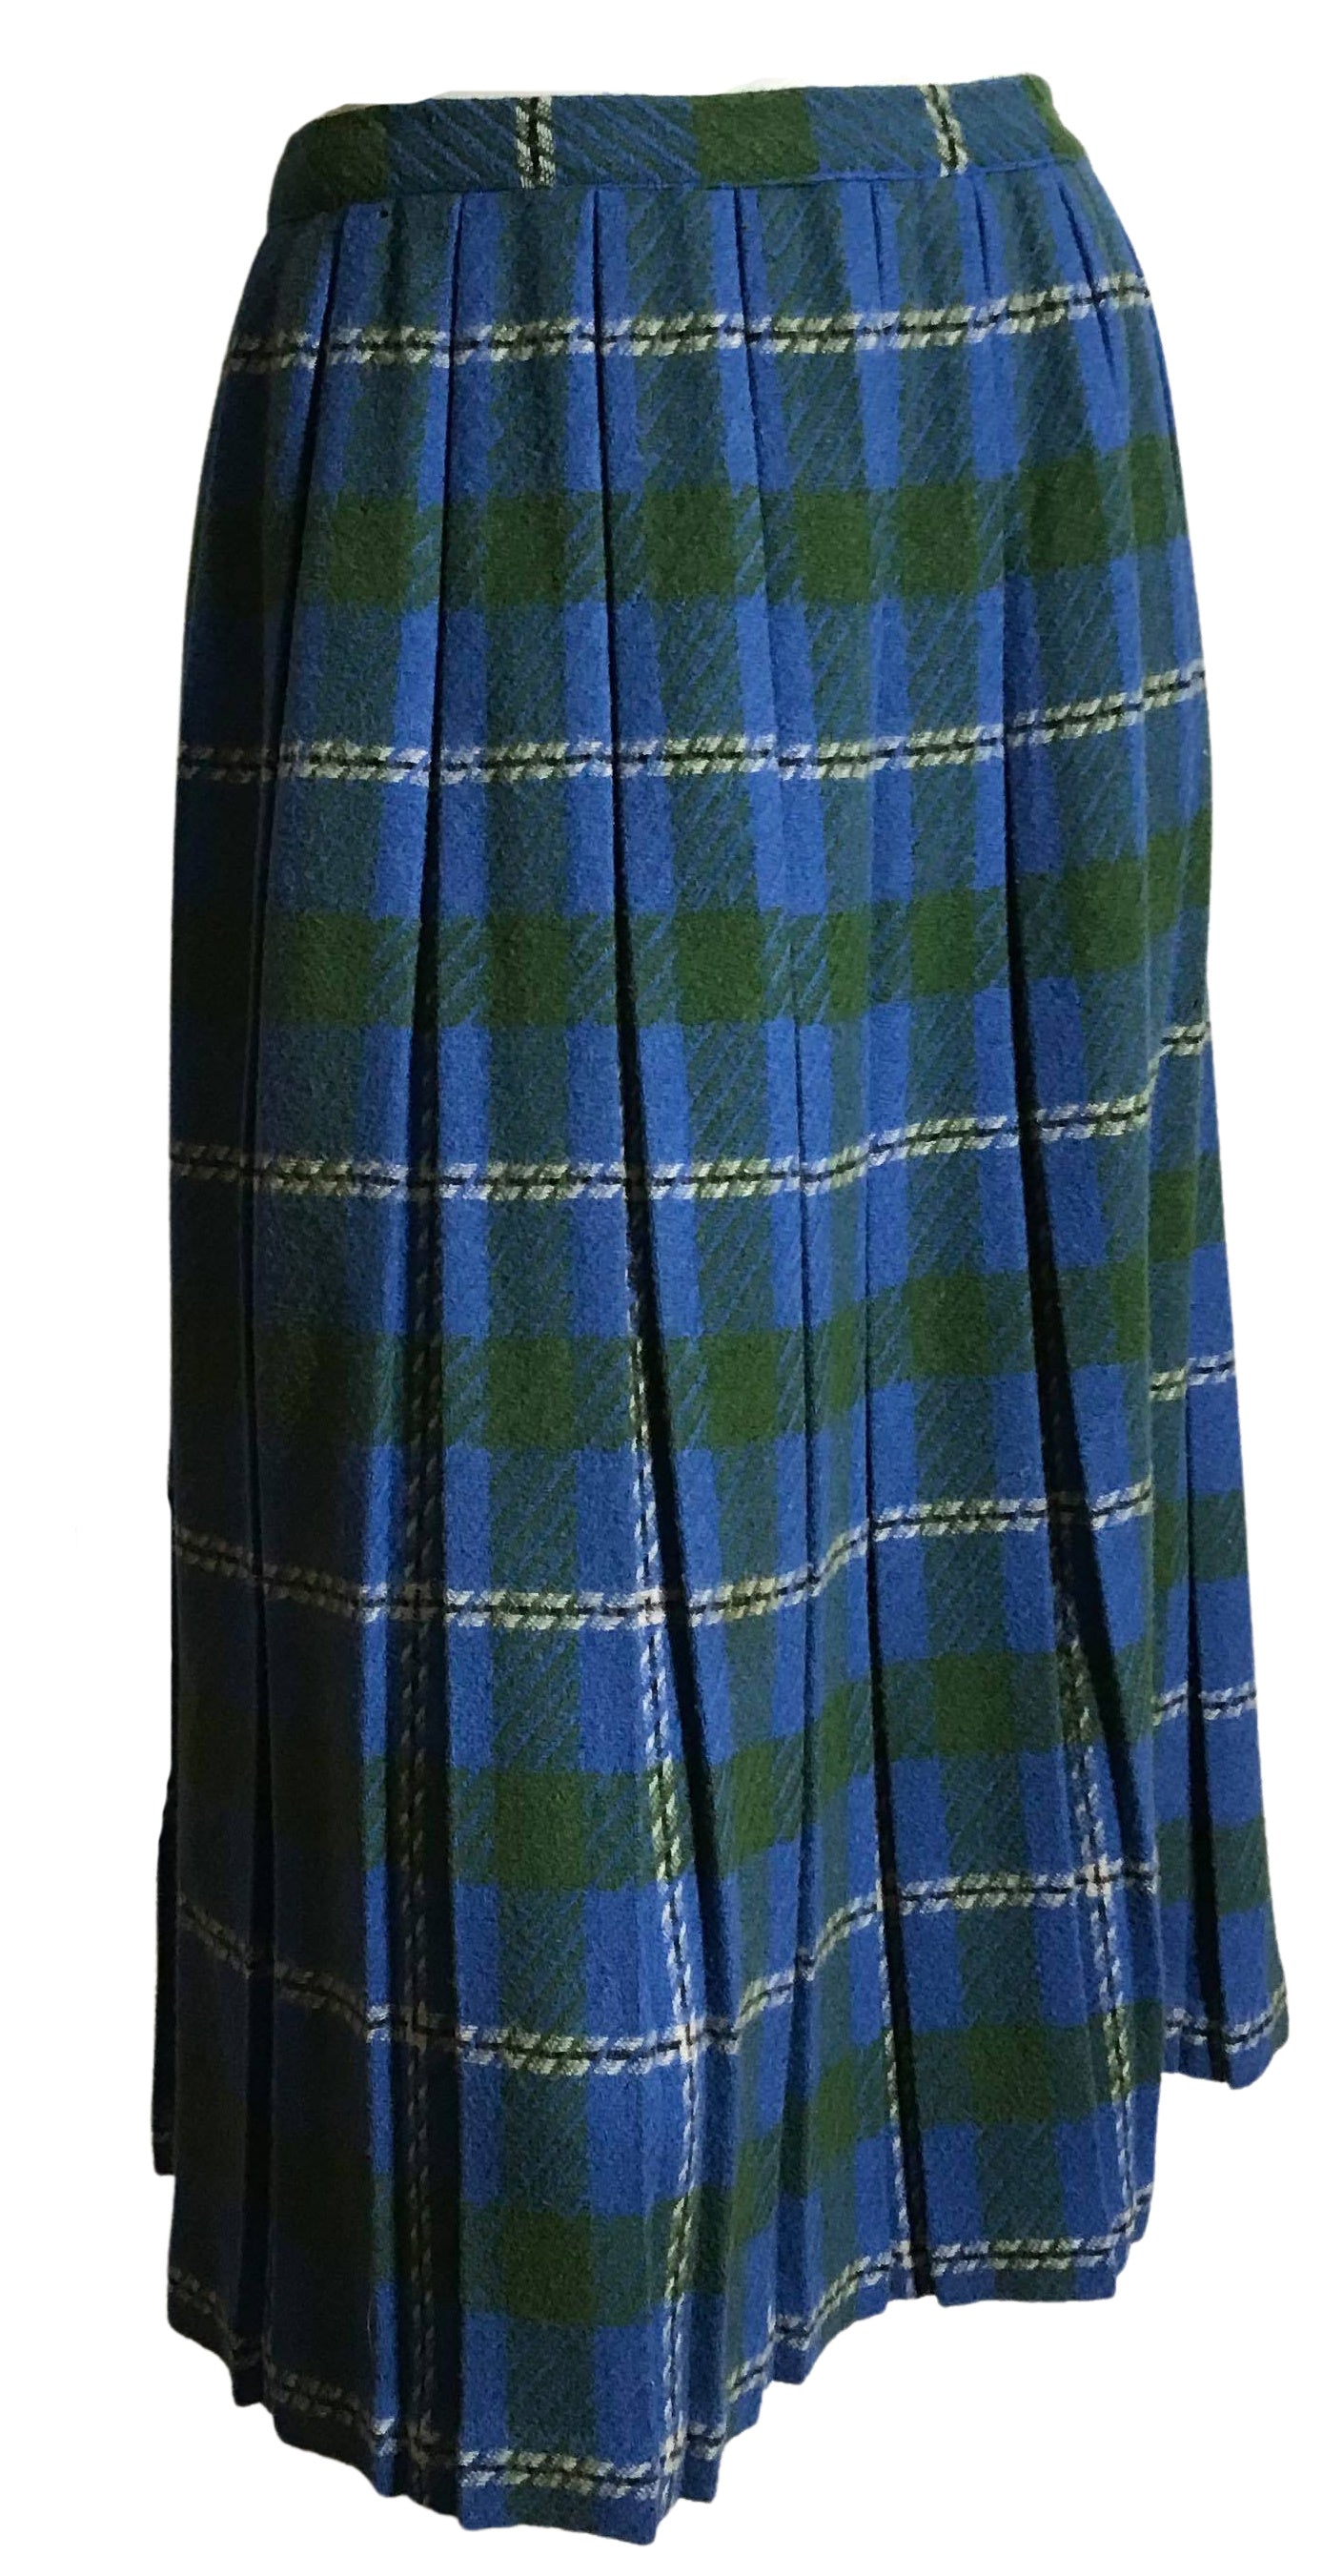 Olive Green and Blue Pleated Wool Skirt circa 1940s